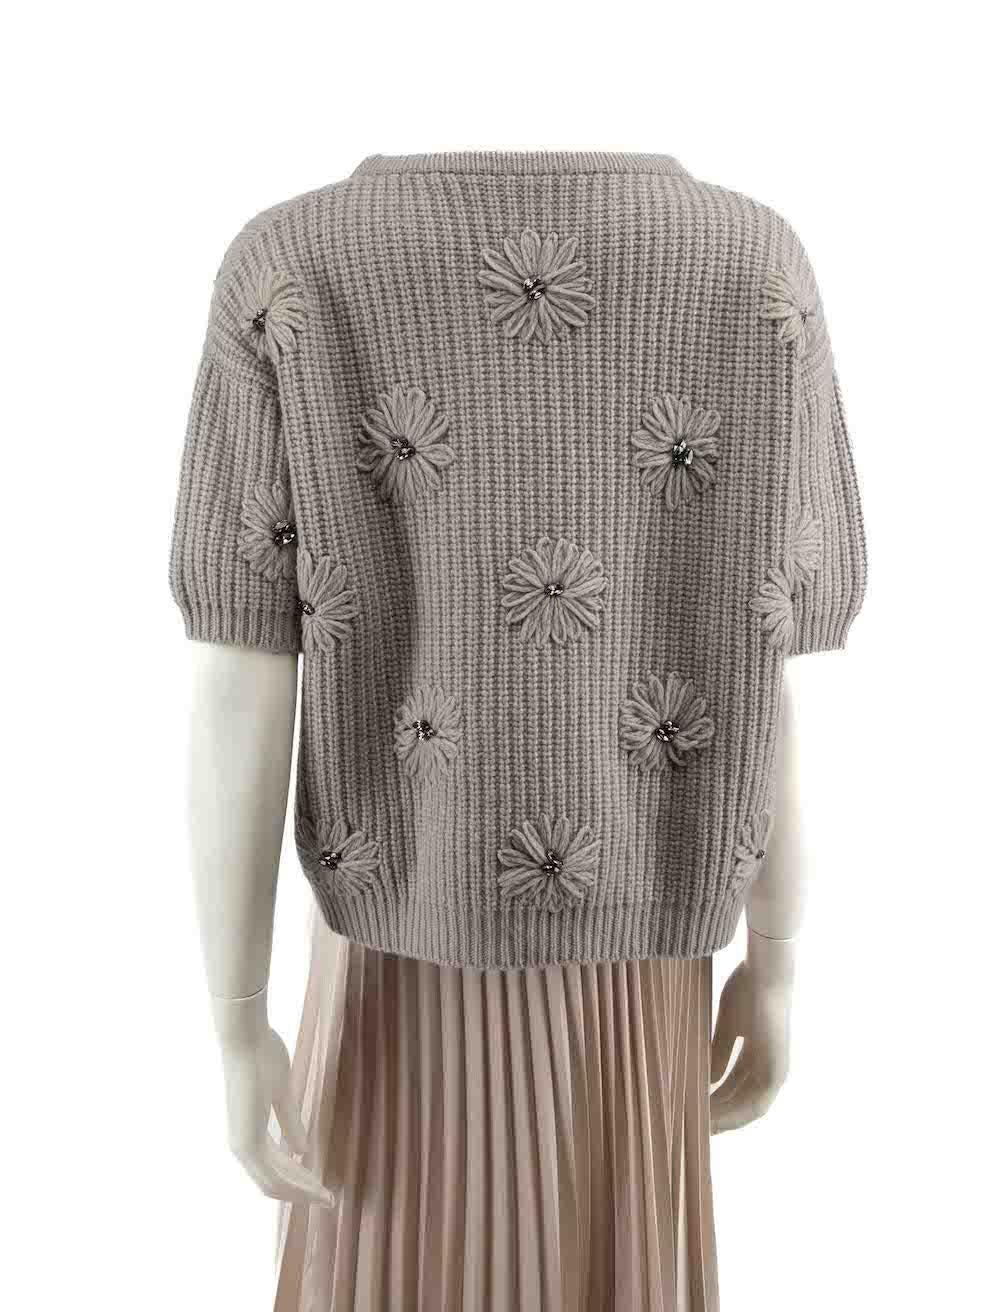 Brunello Cucinelli Grey Cashmere Floral Jumper Size M In Good Condition For Sale In London, GB